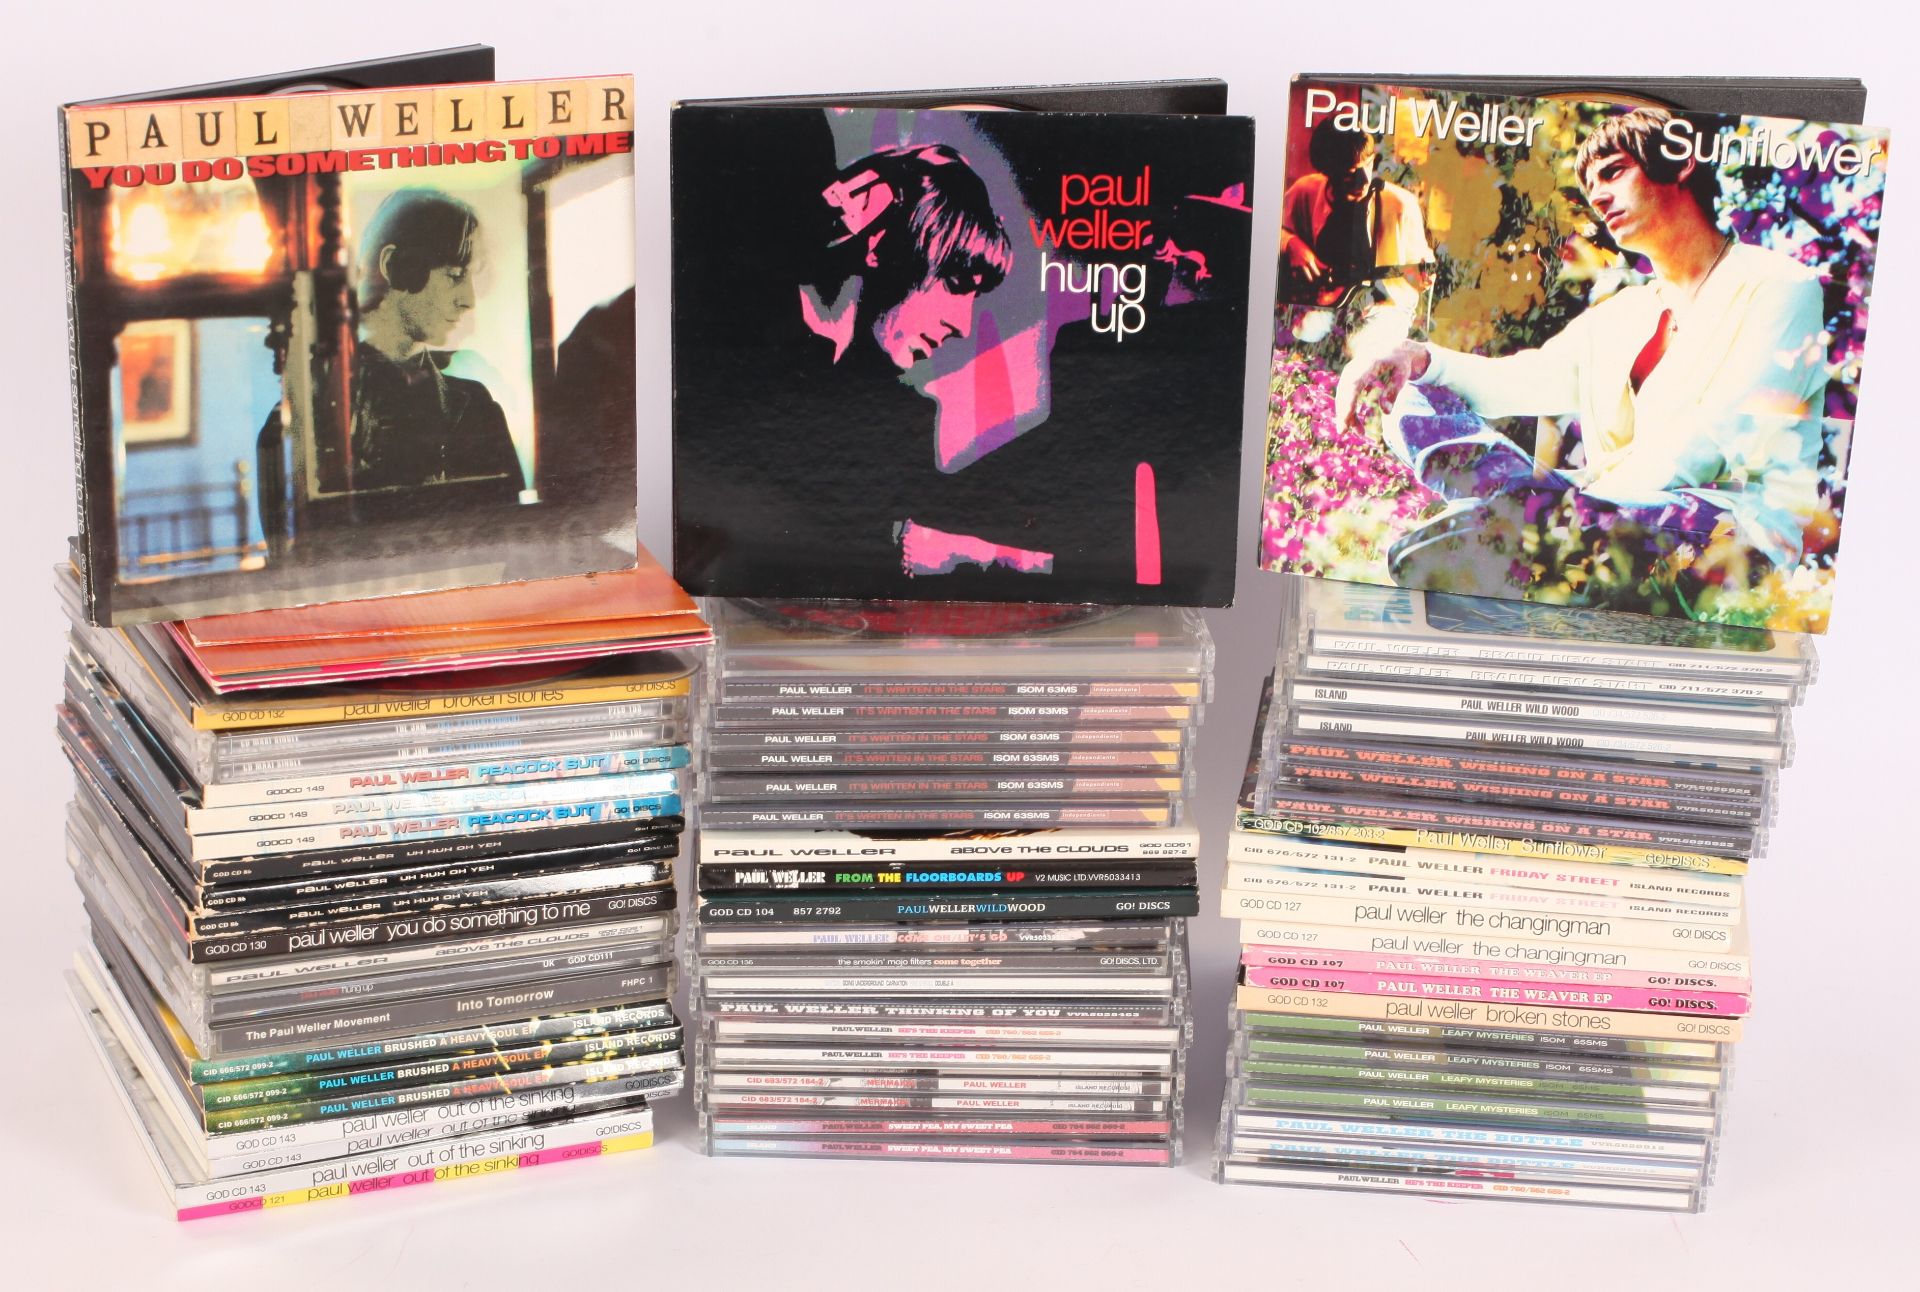 Paul Weller and Related CD Singles and EPs